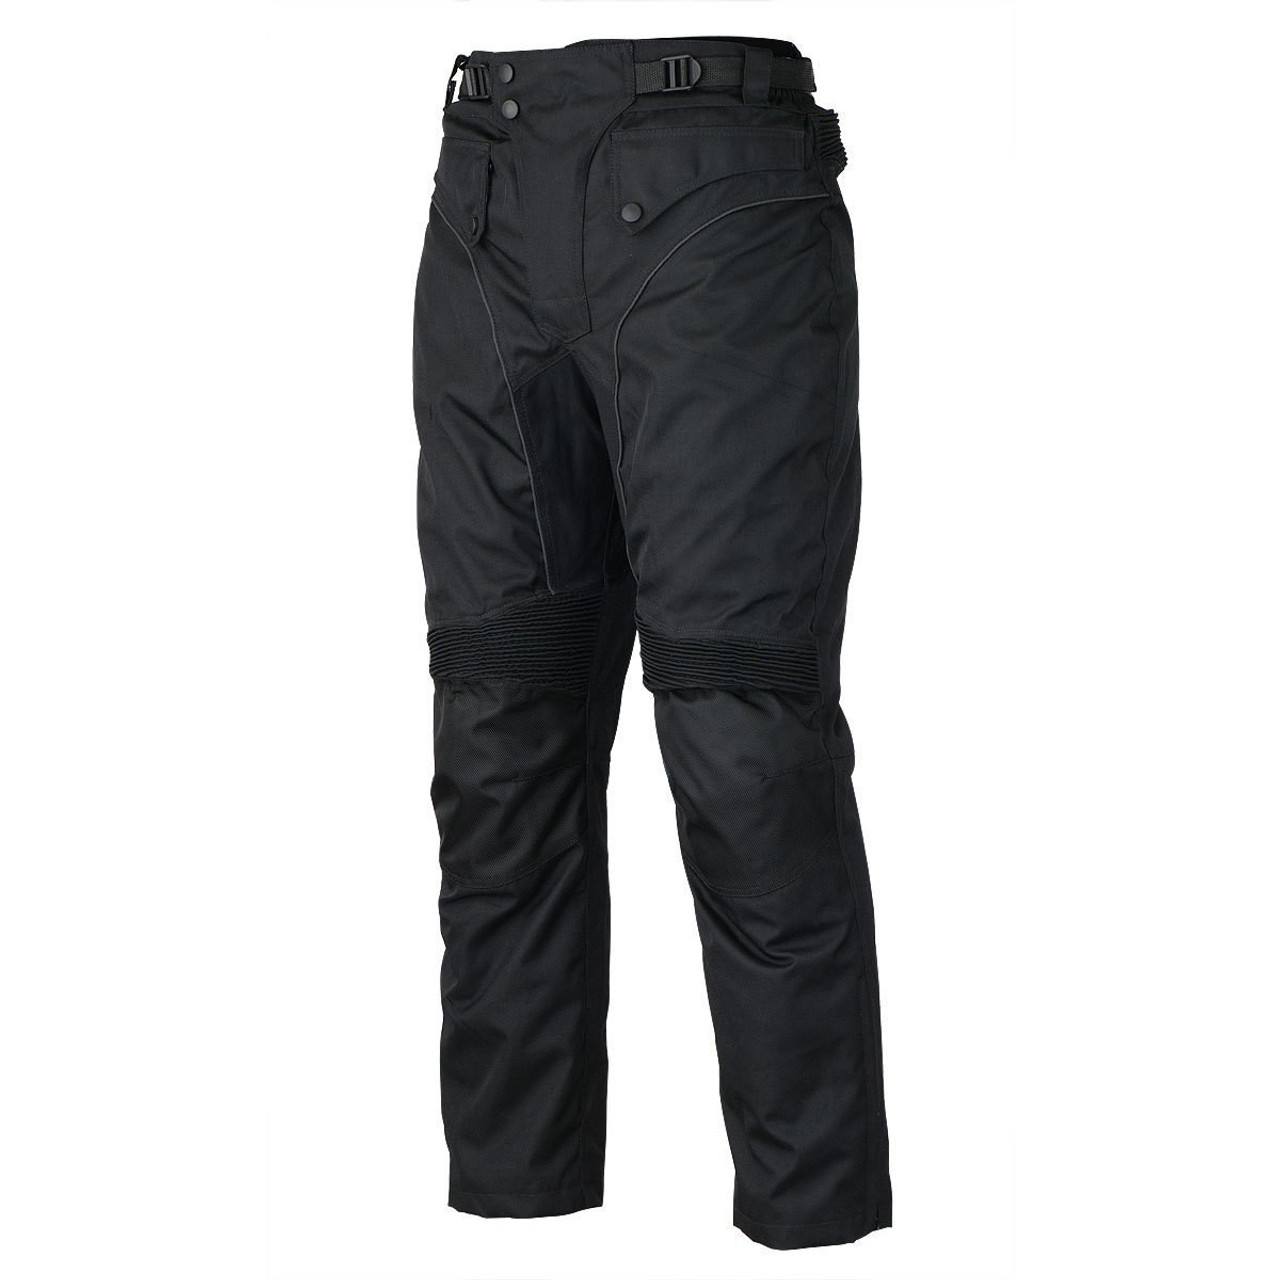 Rev'it OUTBACK 4 H2O Touring Motorcycle Pants Black - Shortened For Sale  Online - Outletmoto.eu